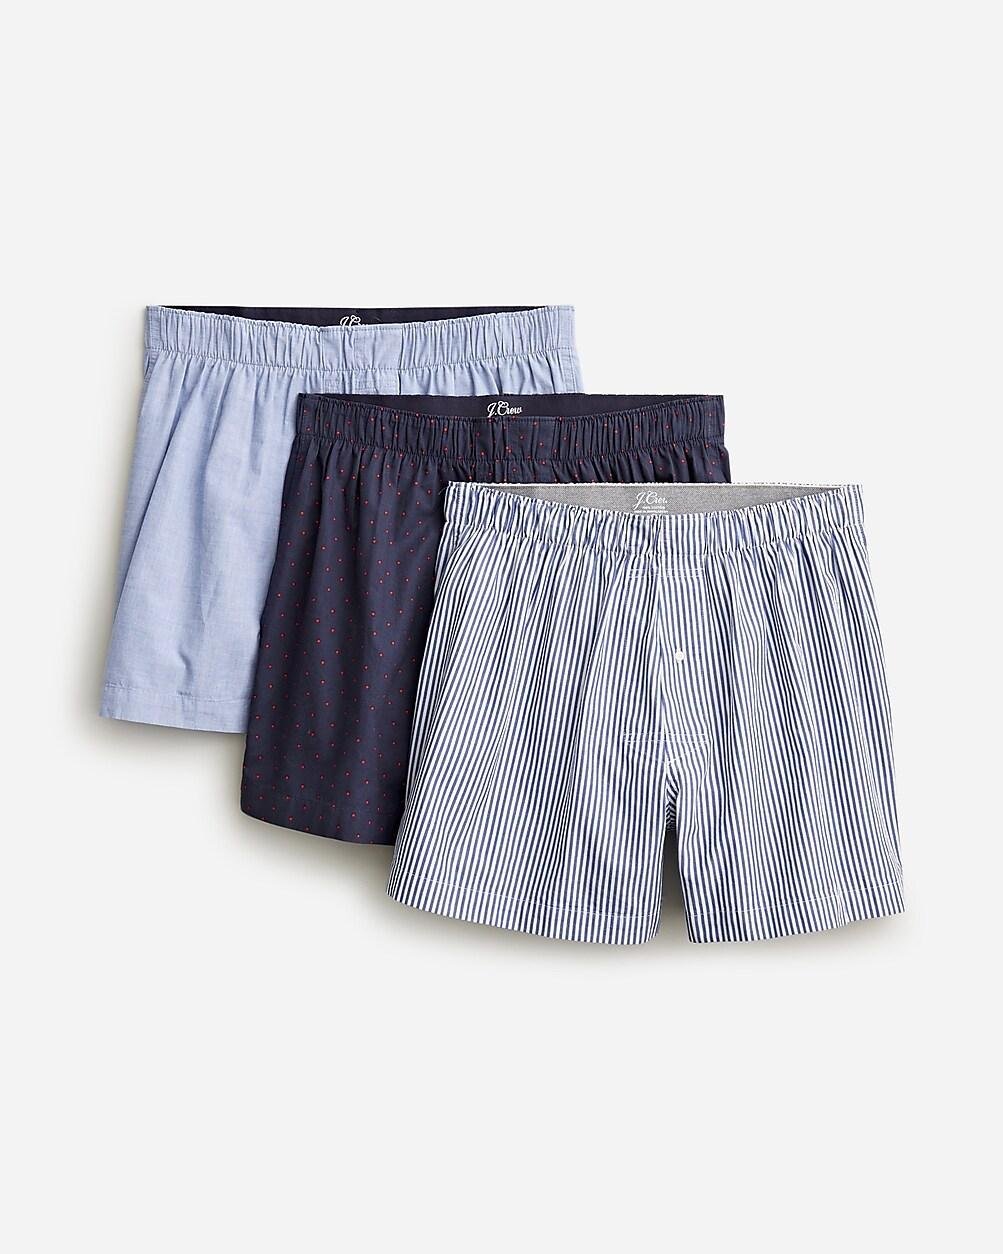 Boxers three-pack by J.CREW